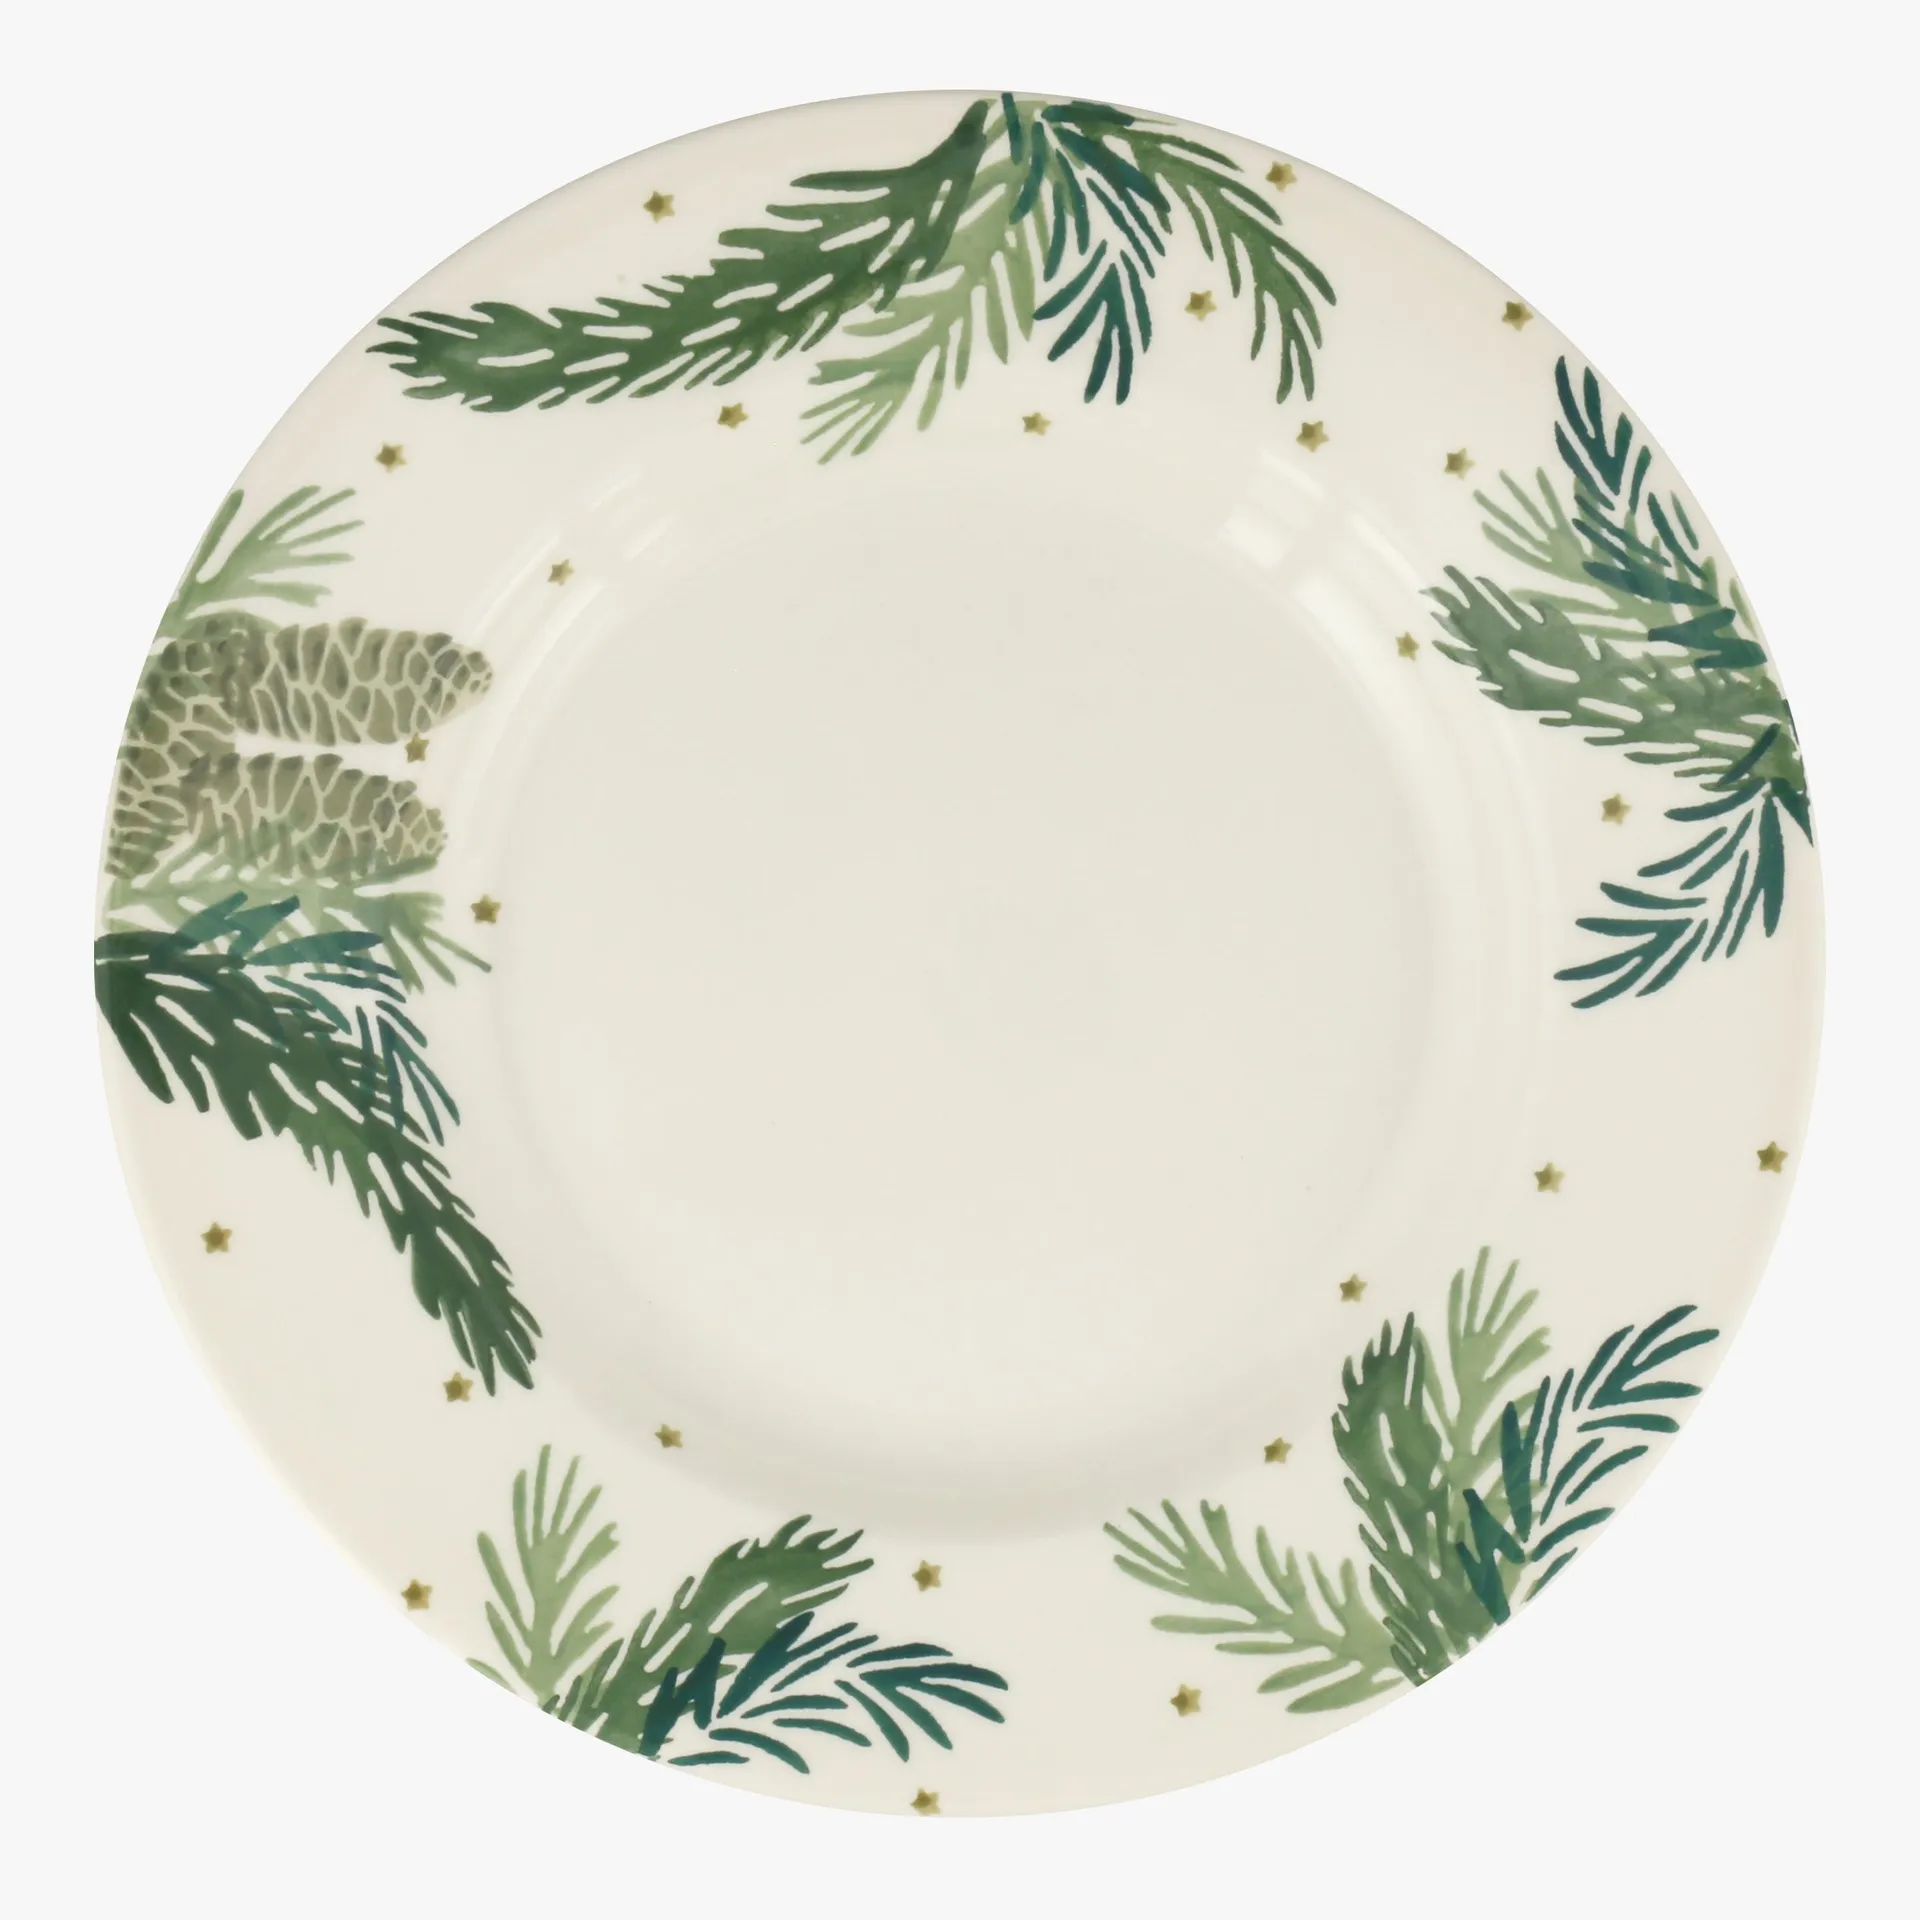 Seconds Spruce 10 1/2 Inch Plate